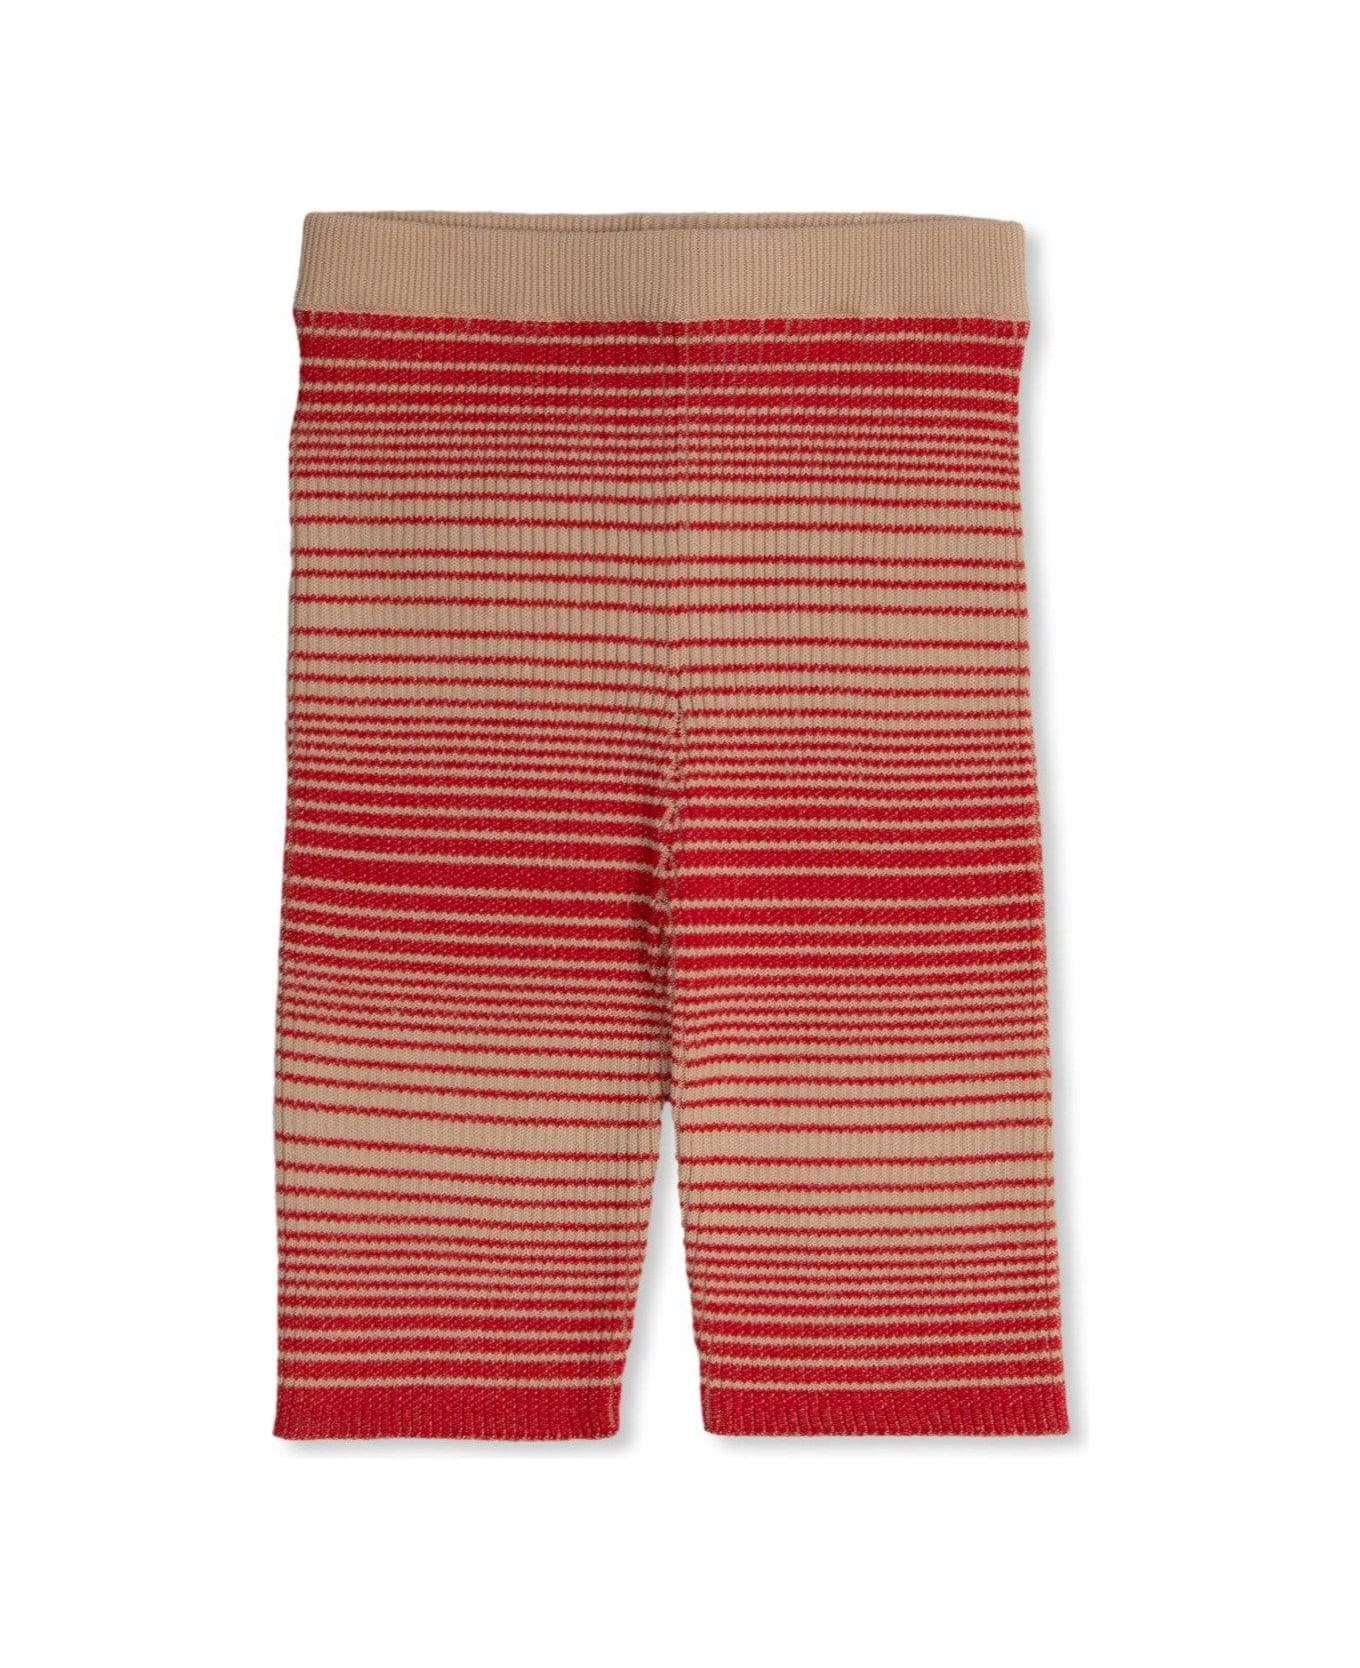 gucci WHT Logo Patch Striped Shorts - Rosso